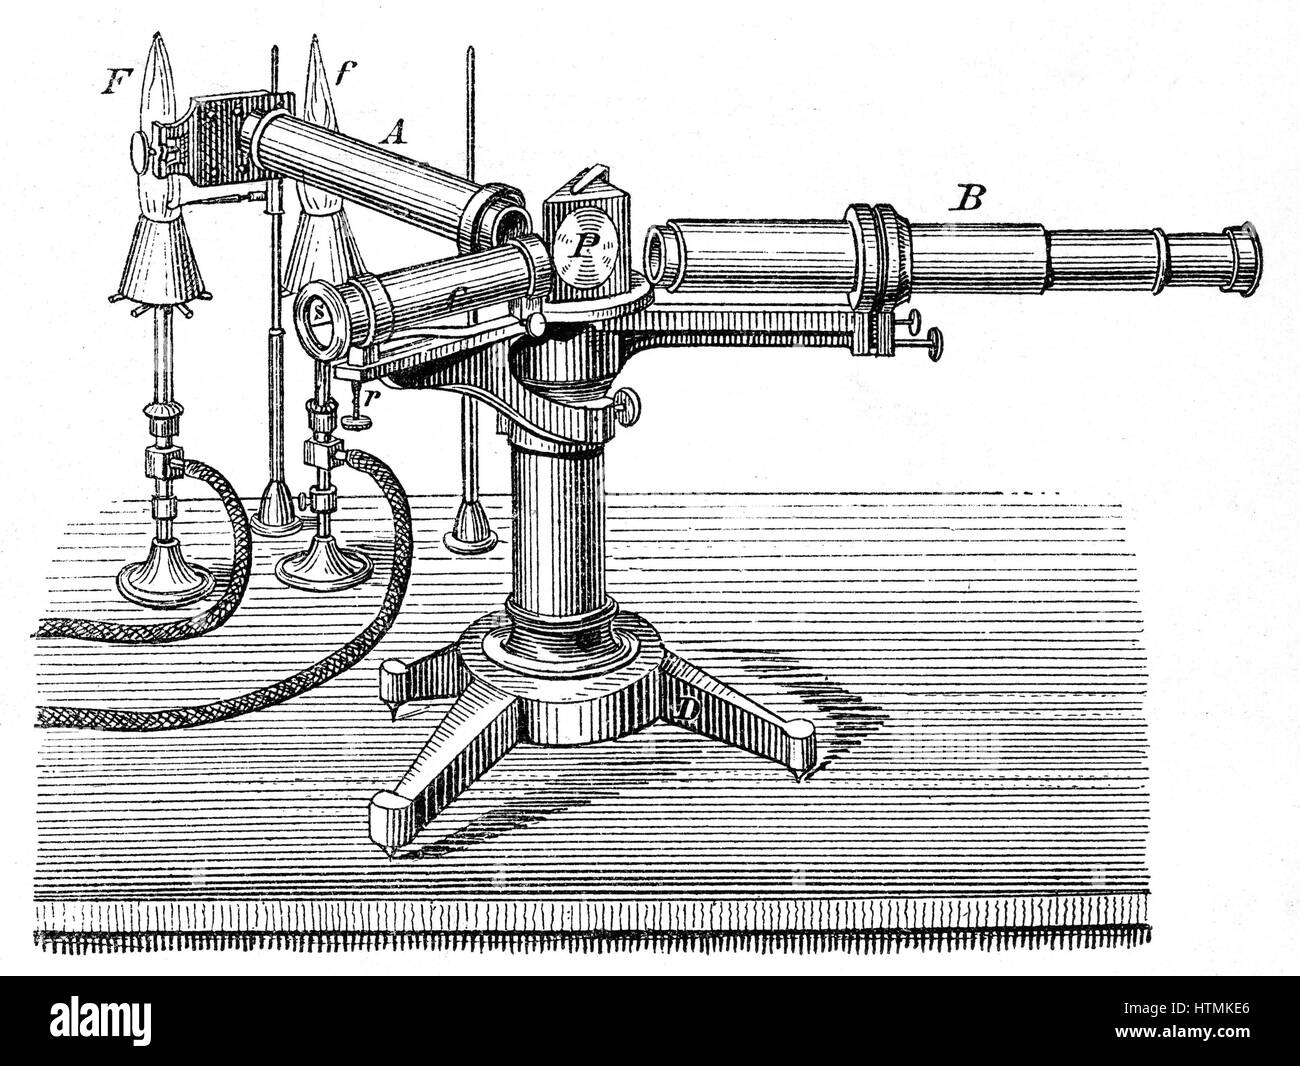 Spectroscopic apparatus used by used by Robert Wilhelm Bunsen (1811-1899) and Gustav Robert Kirchhoff (1824-1887). Discovered Spectrum Analysis (1859) which enabled discovery of elements including caesium and rubidium. Engraving c1895 Stock Photo